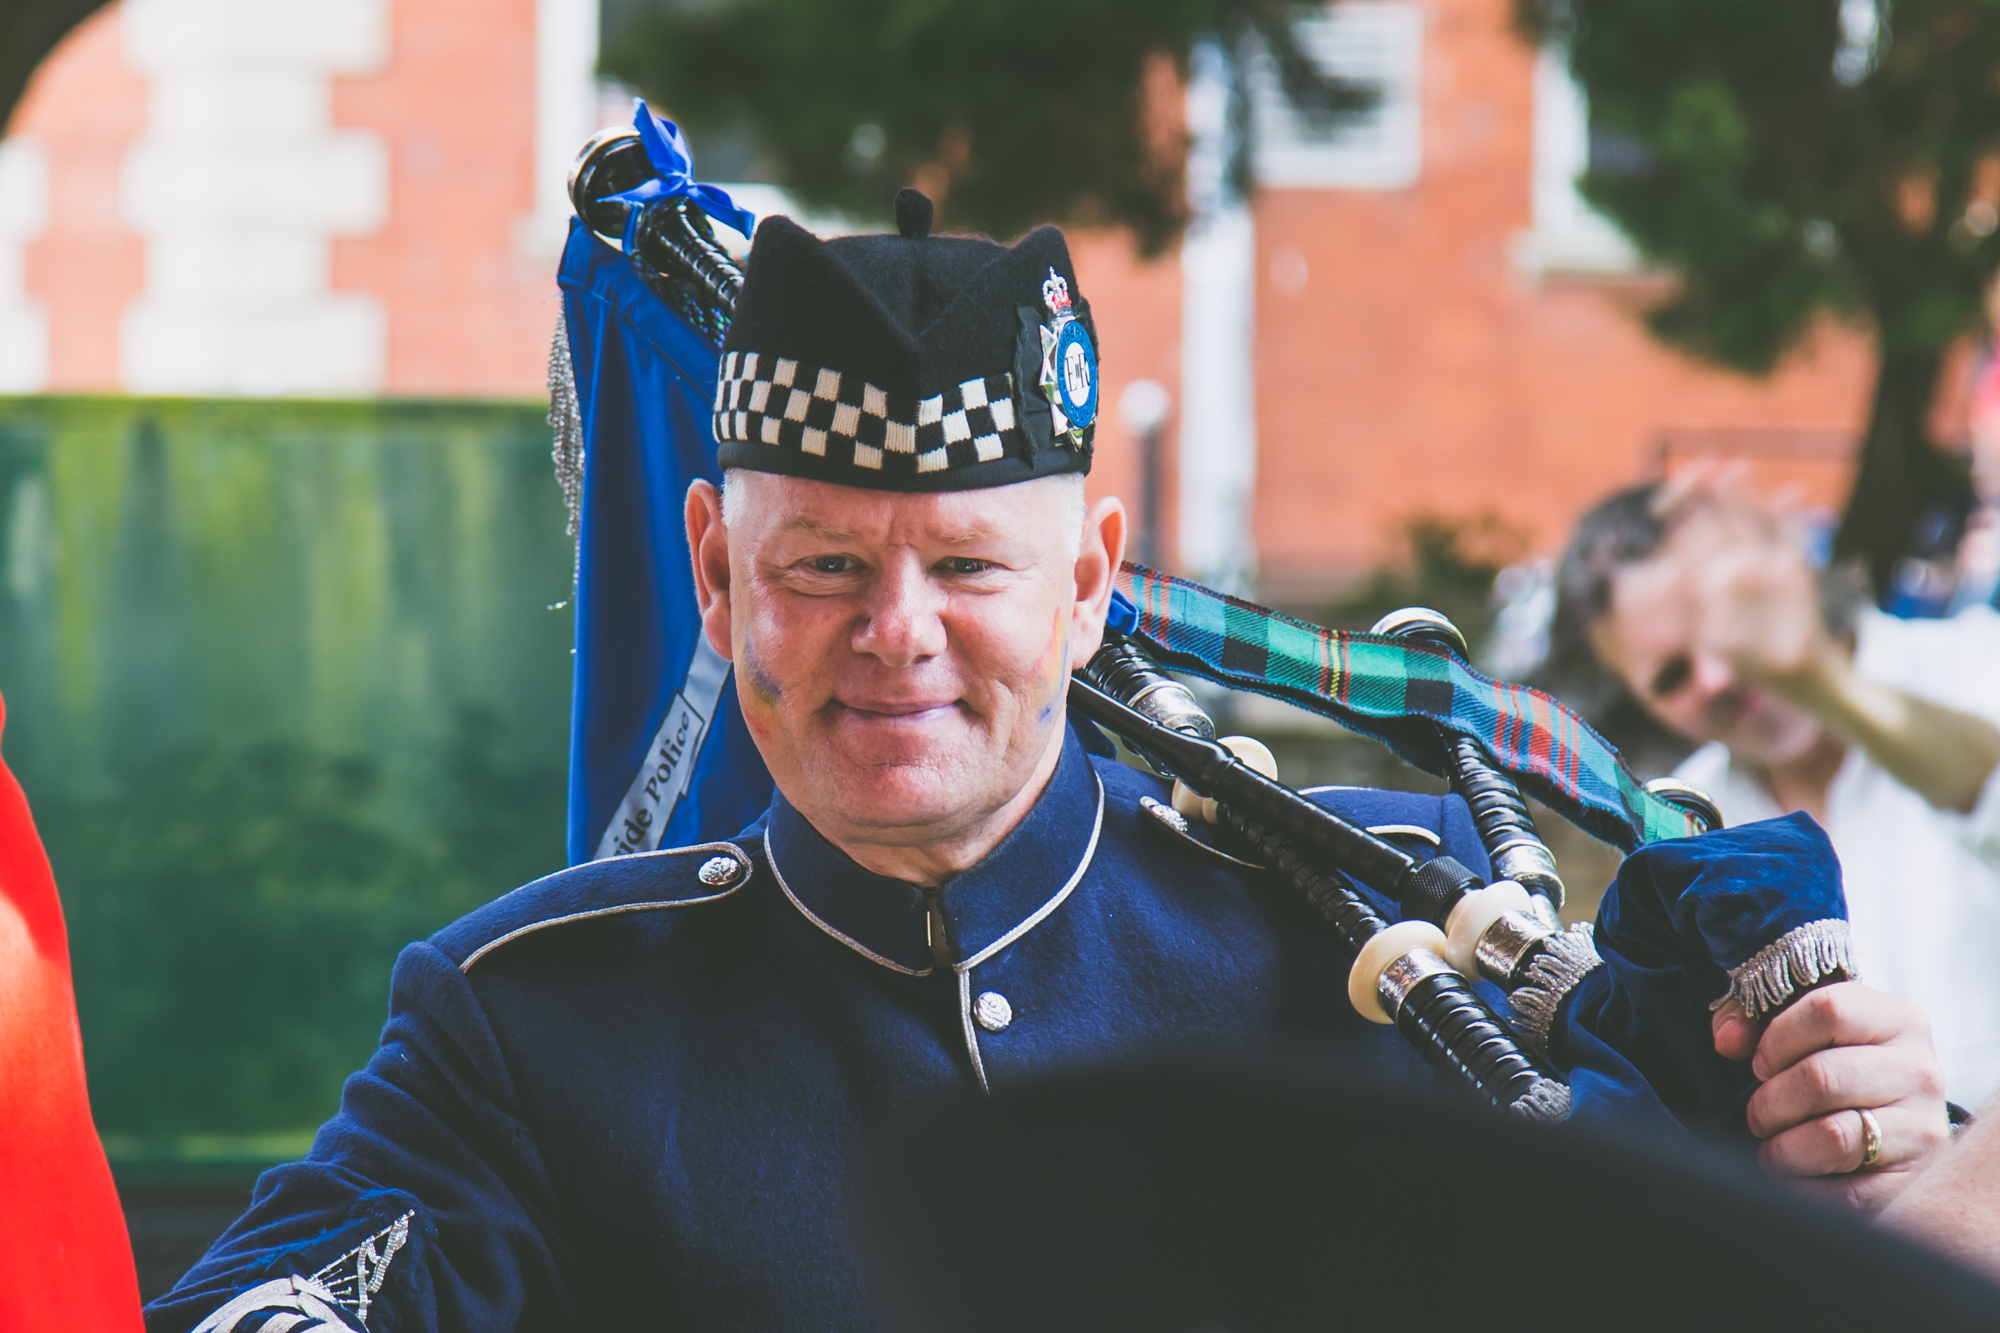 Bagpipe player portrait